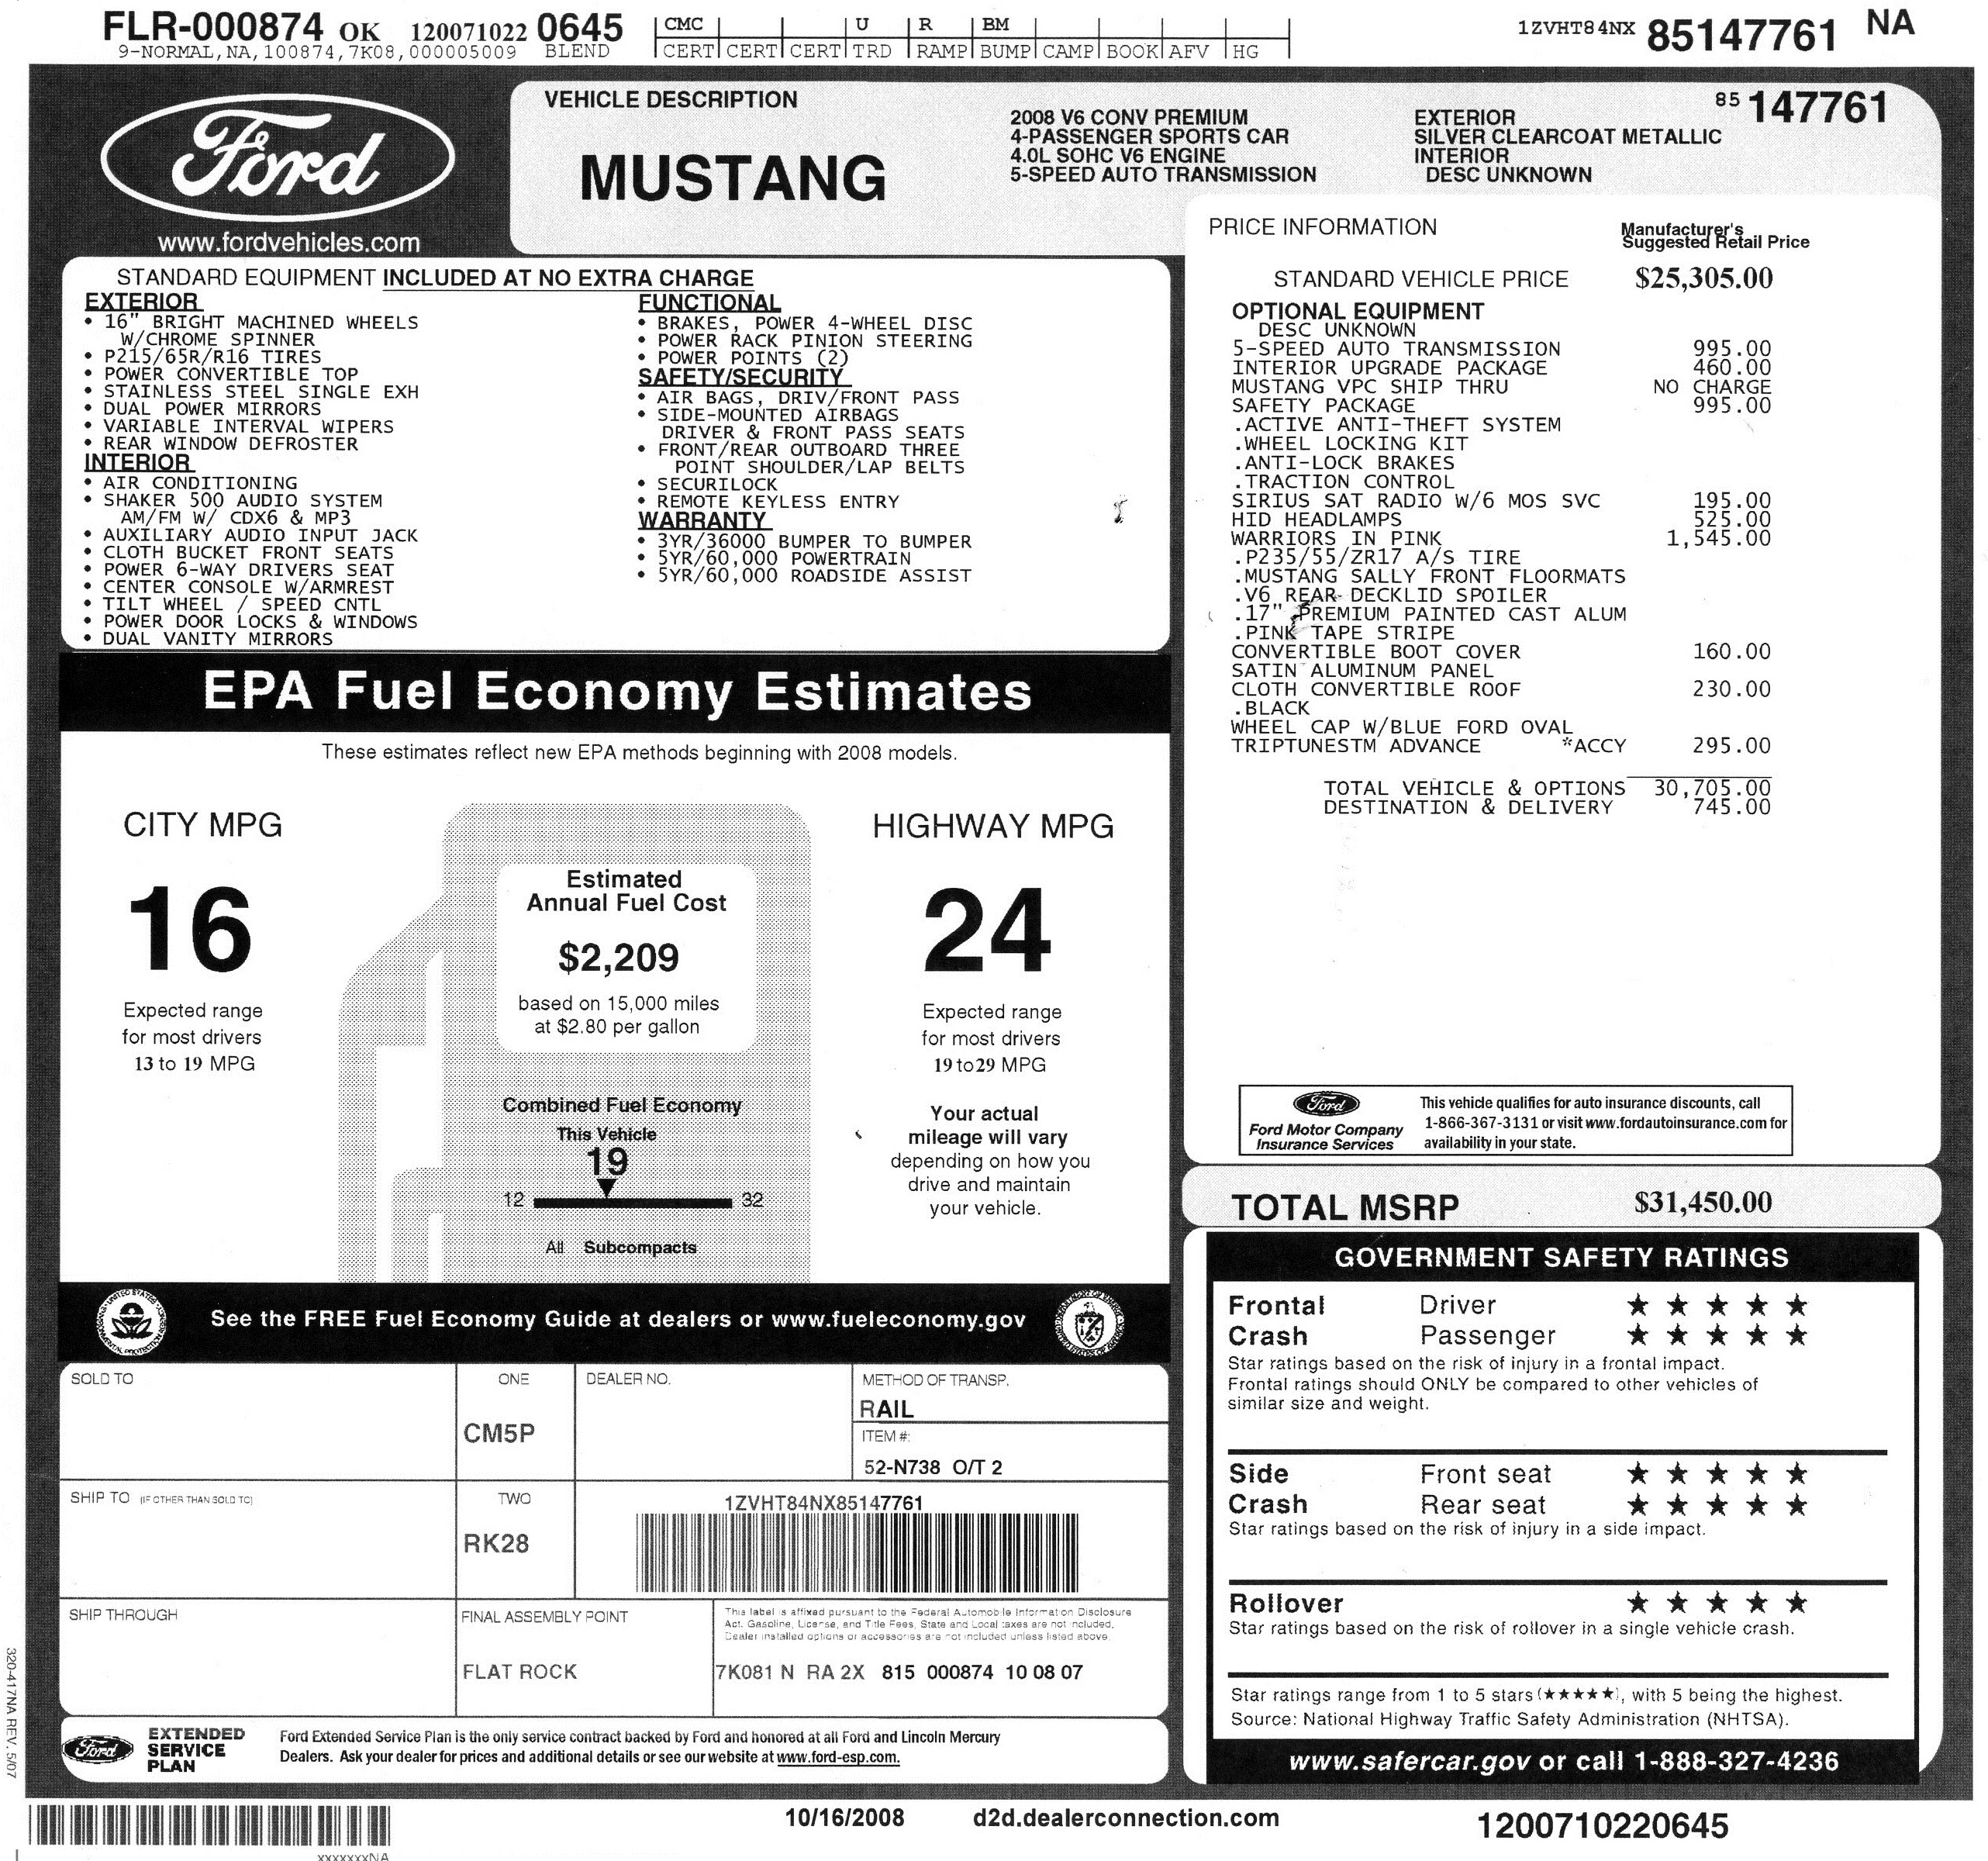 Ford truck invoices #9